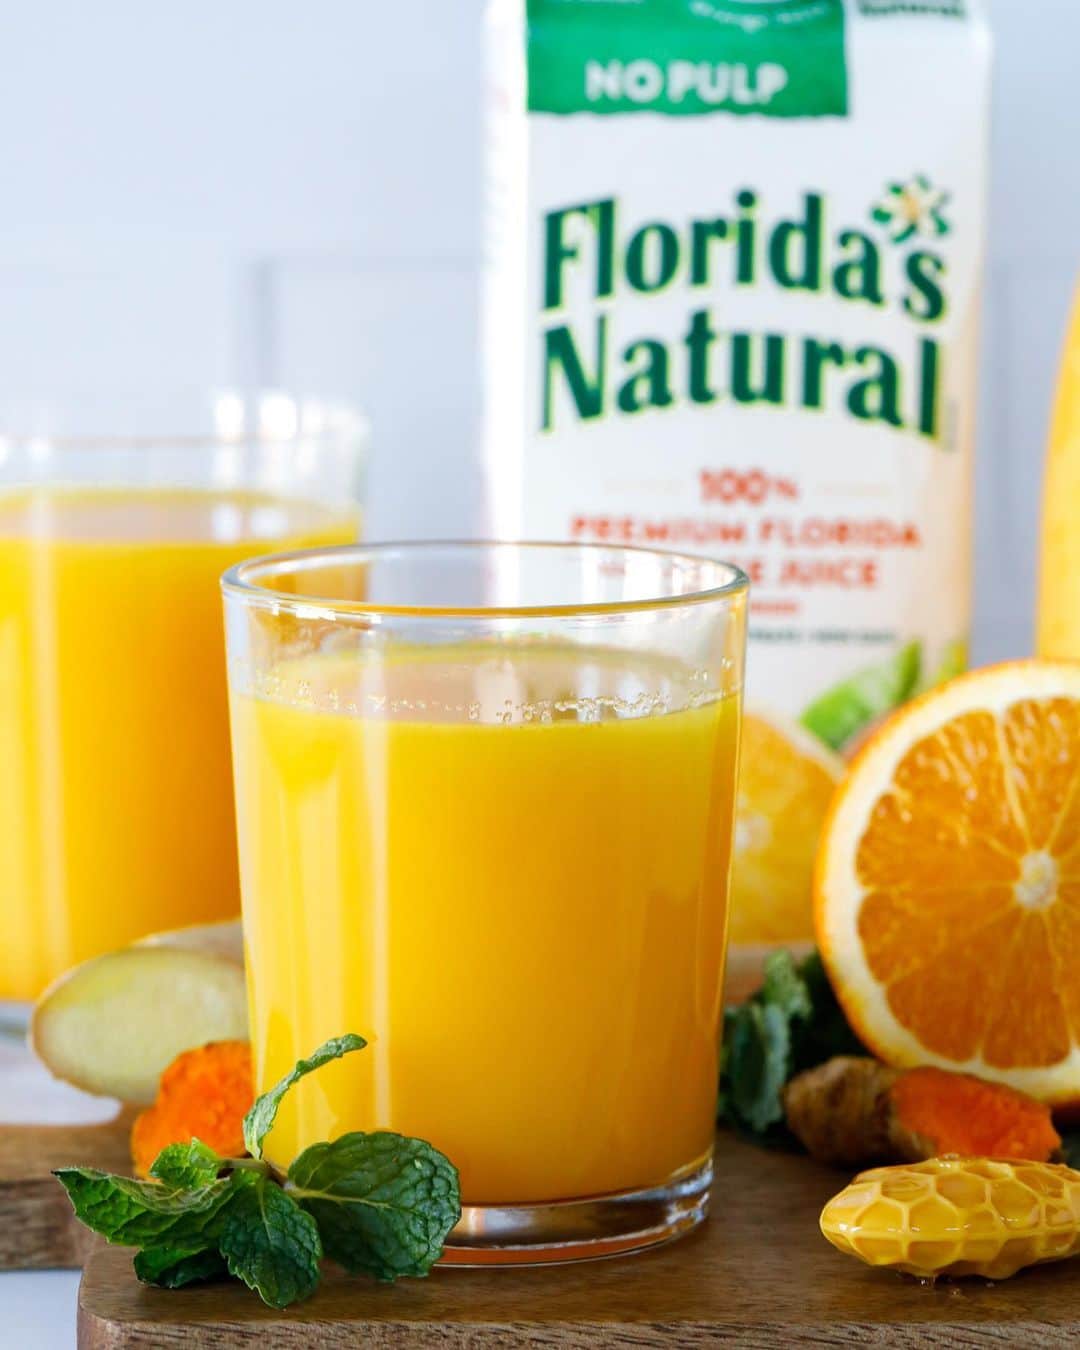 Easy Recipesのインスタグラム：「Looking to give your immune system a boost? Made with @floridasnatural Orange Juice, this Orange-Ade Immune Booster Drink is jam packed with immune boosting ingredients like fresh ginger, fresh turmeric, honey and lemon juice. Floridas Natural Orange Juice has no artificial flavors or ingredients, no added water or preservatives. #FloridasNatural #sponsored  Get more details and full recipe from the link in my bio.  https://www.cookinwithmima.com/orange-immune-booster-drink/」